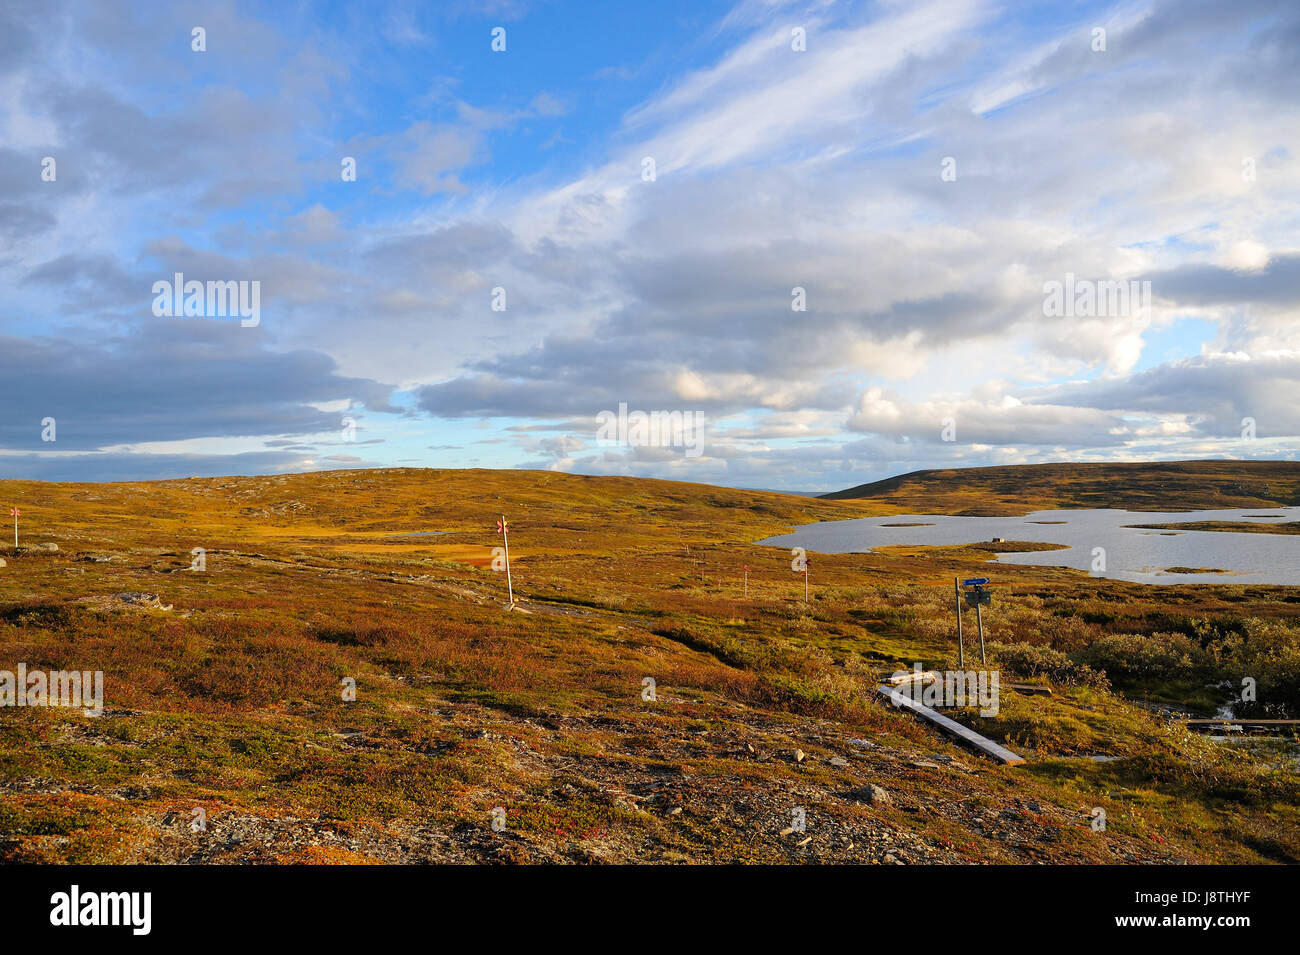 sweden, glacier, tundra, sunset, width, sweden, evening, loneliness, cloudy, Stock Photo